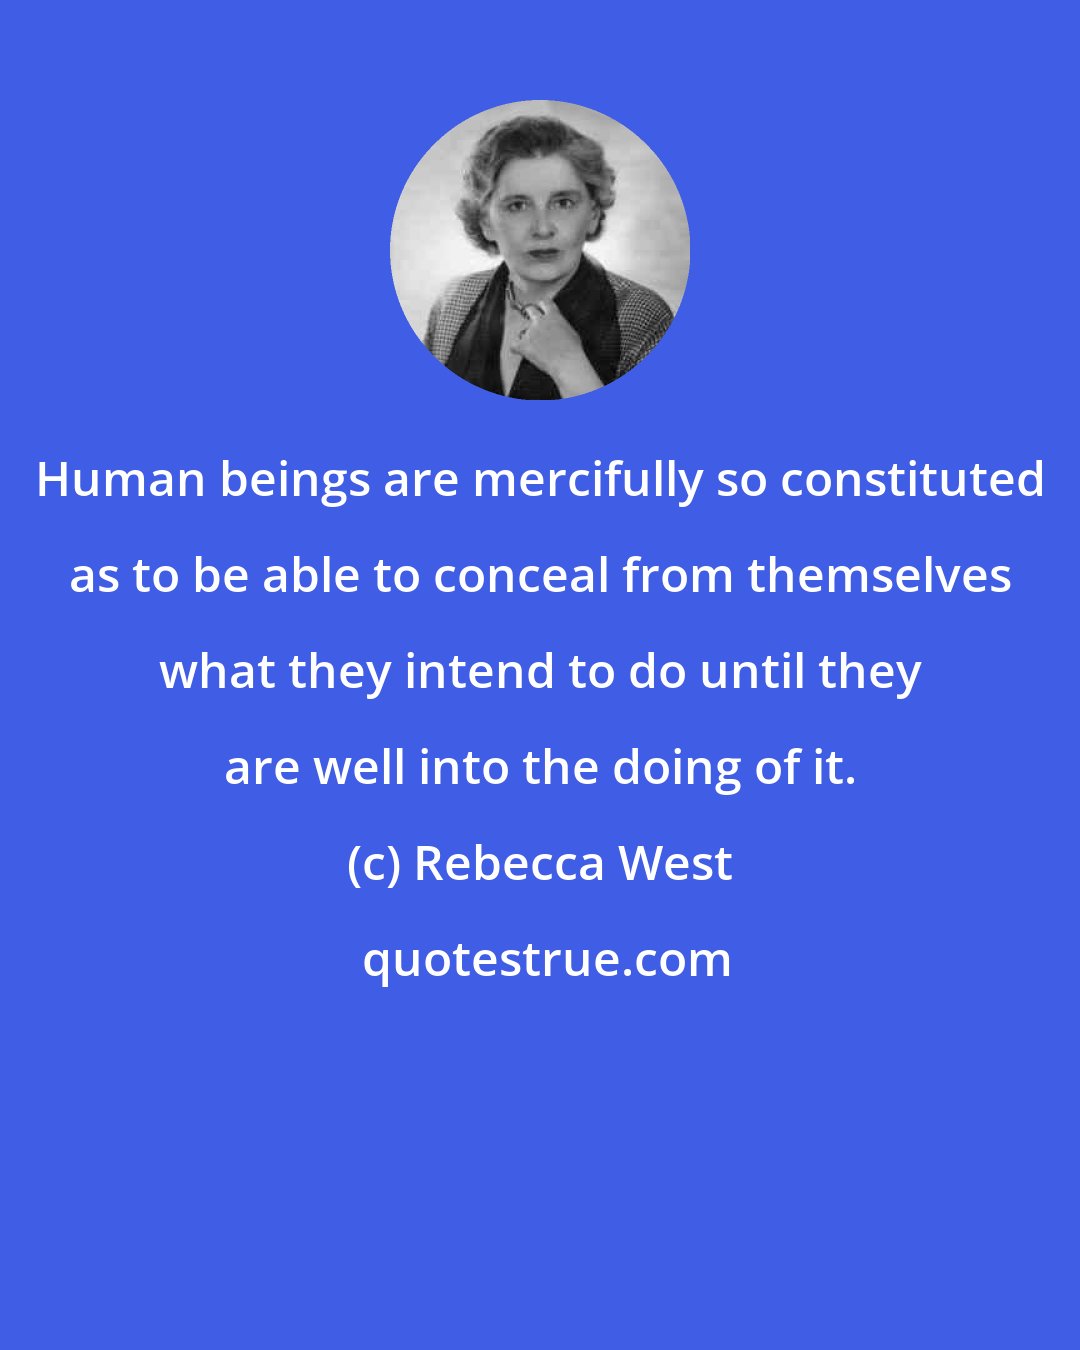 Rebecca West: Human beings are mercifully so constituted as to be able to conceal from themselves what they intend to do until they are well into the doing of it.